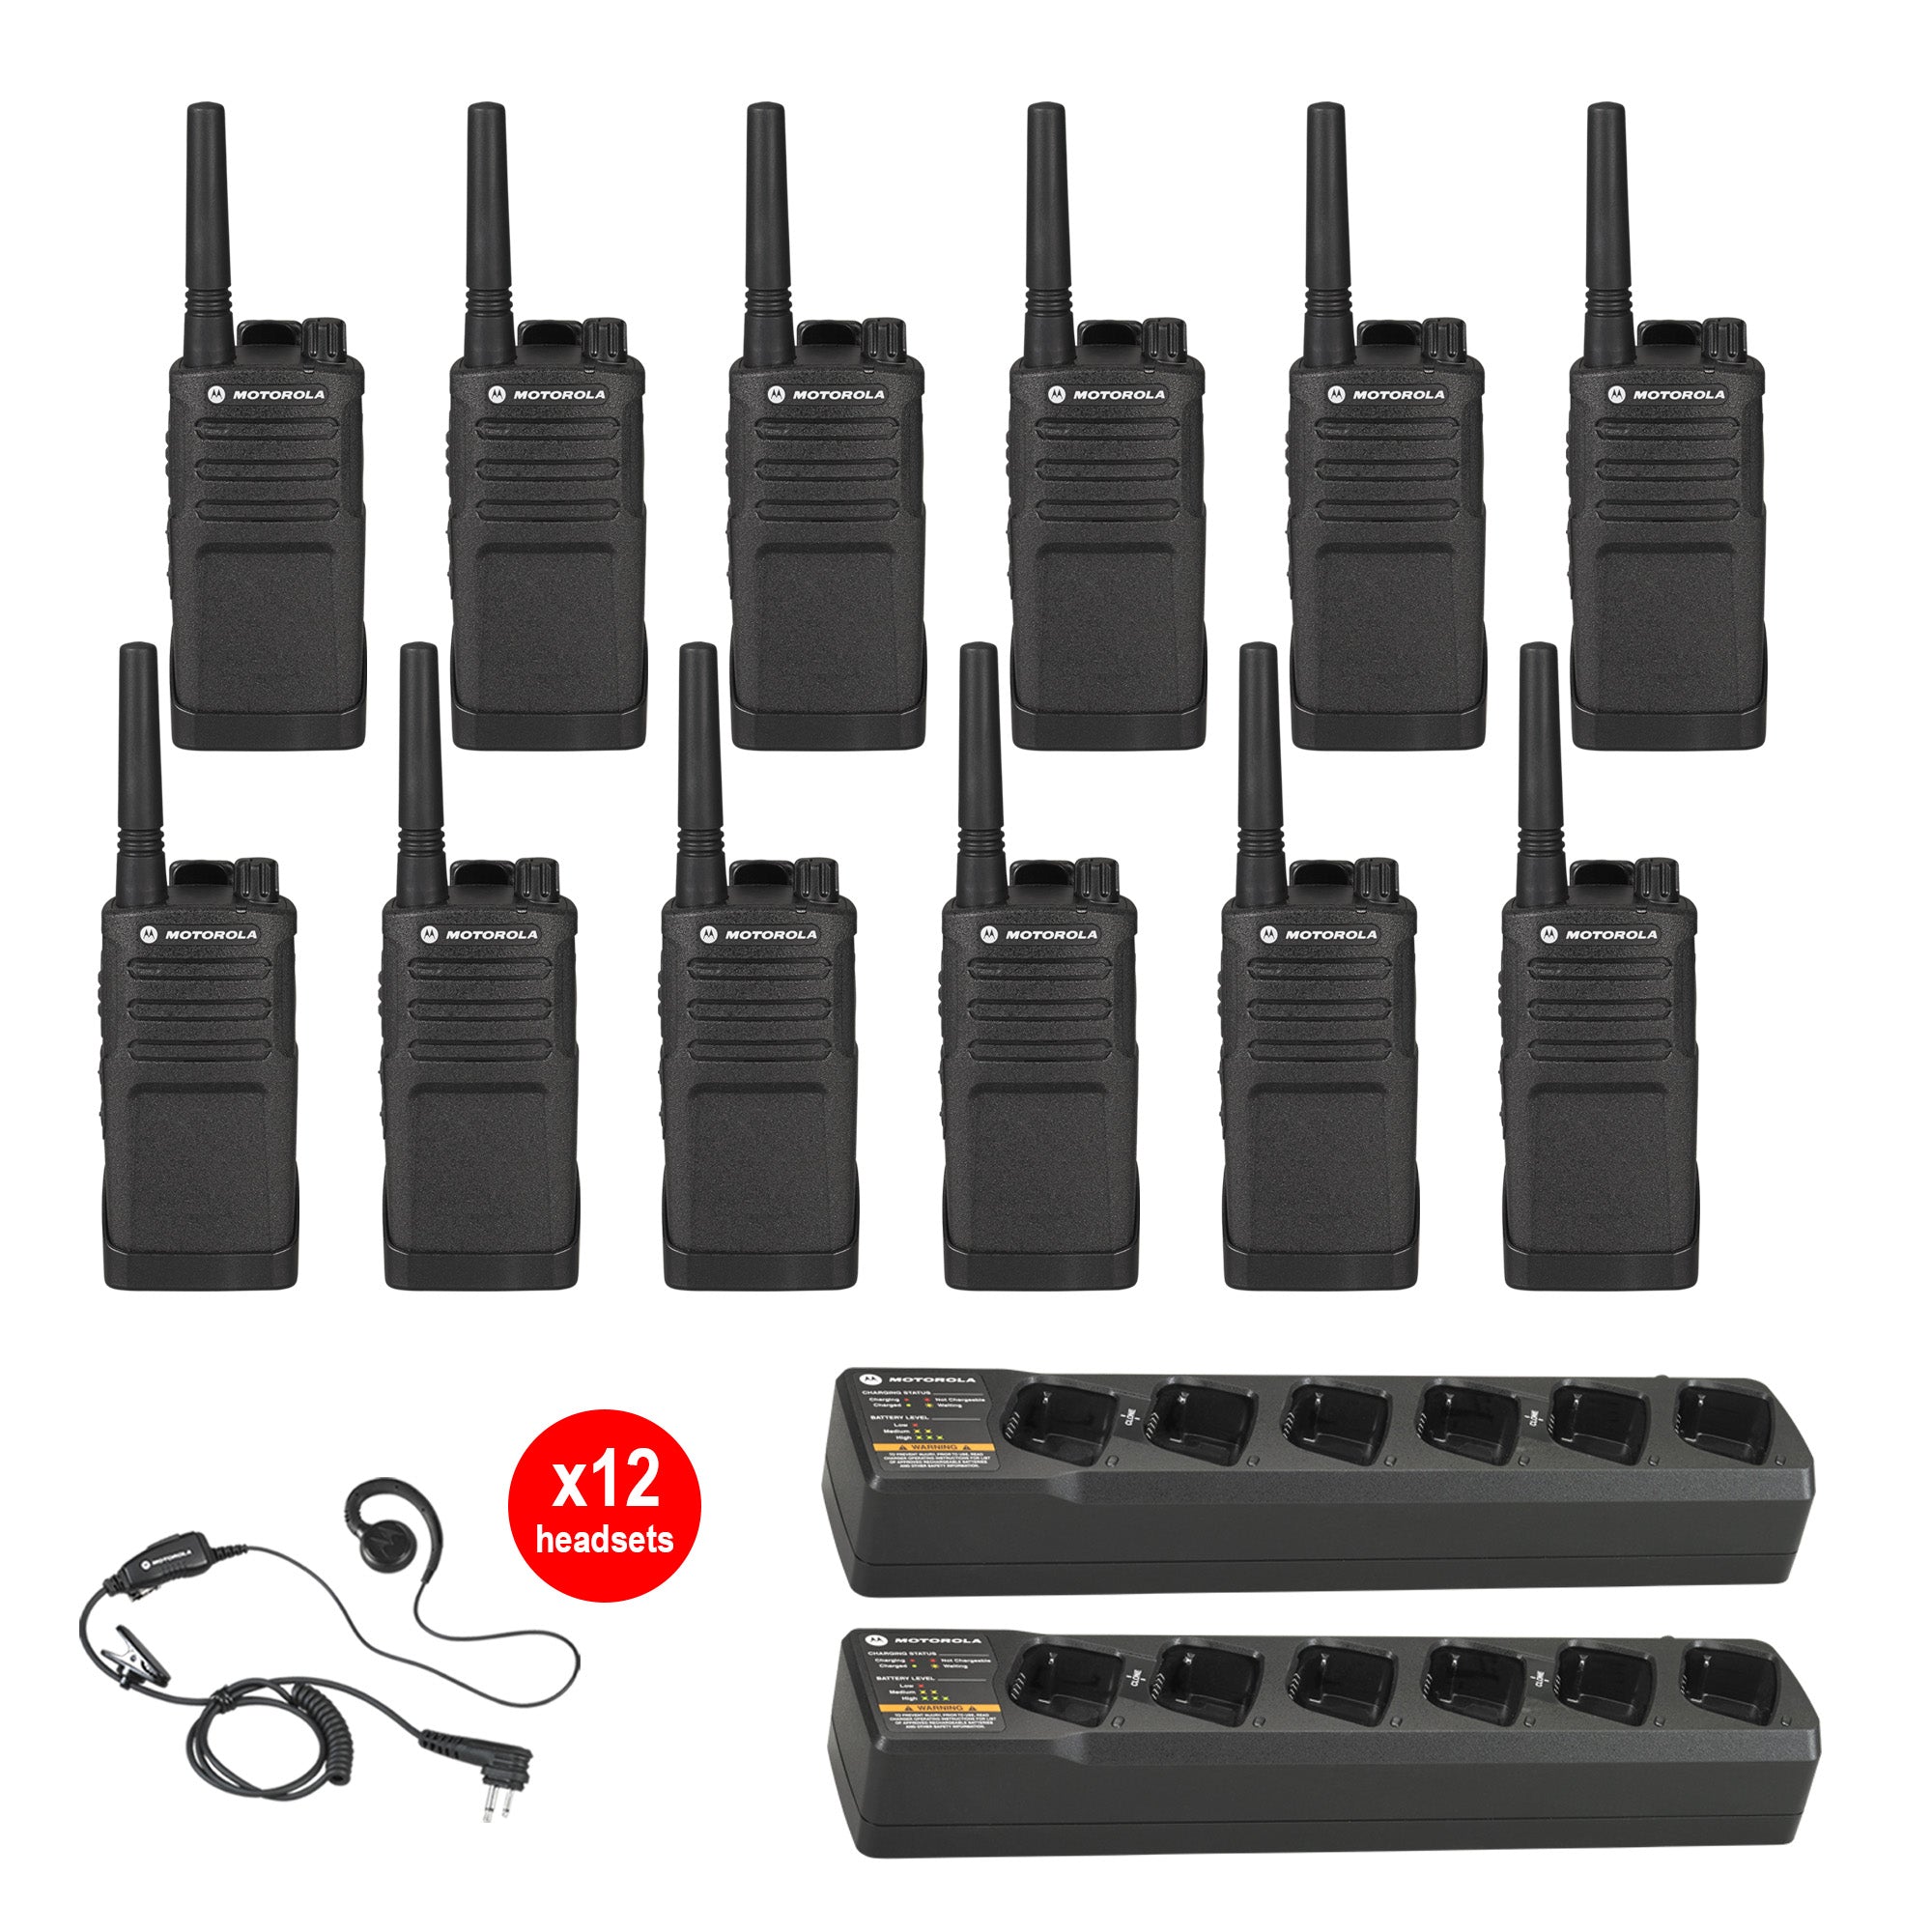 Motorola RMU2040 12 pack with Multi Charger and Headsets| TwoWayRadioGear